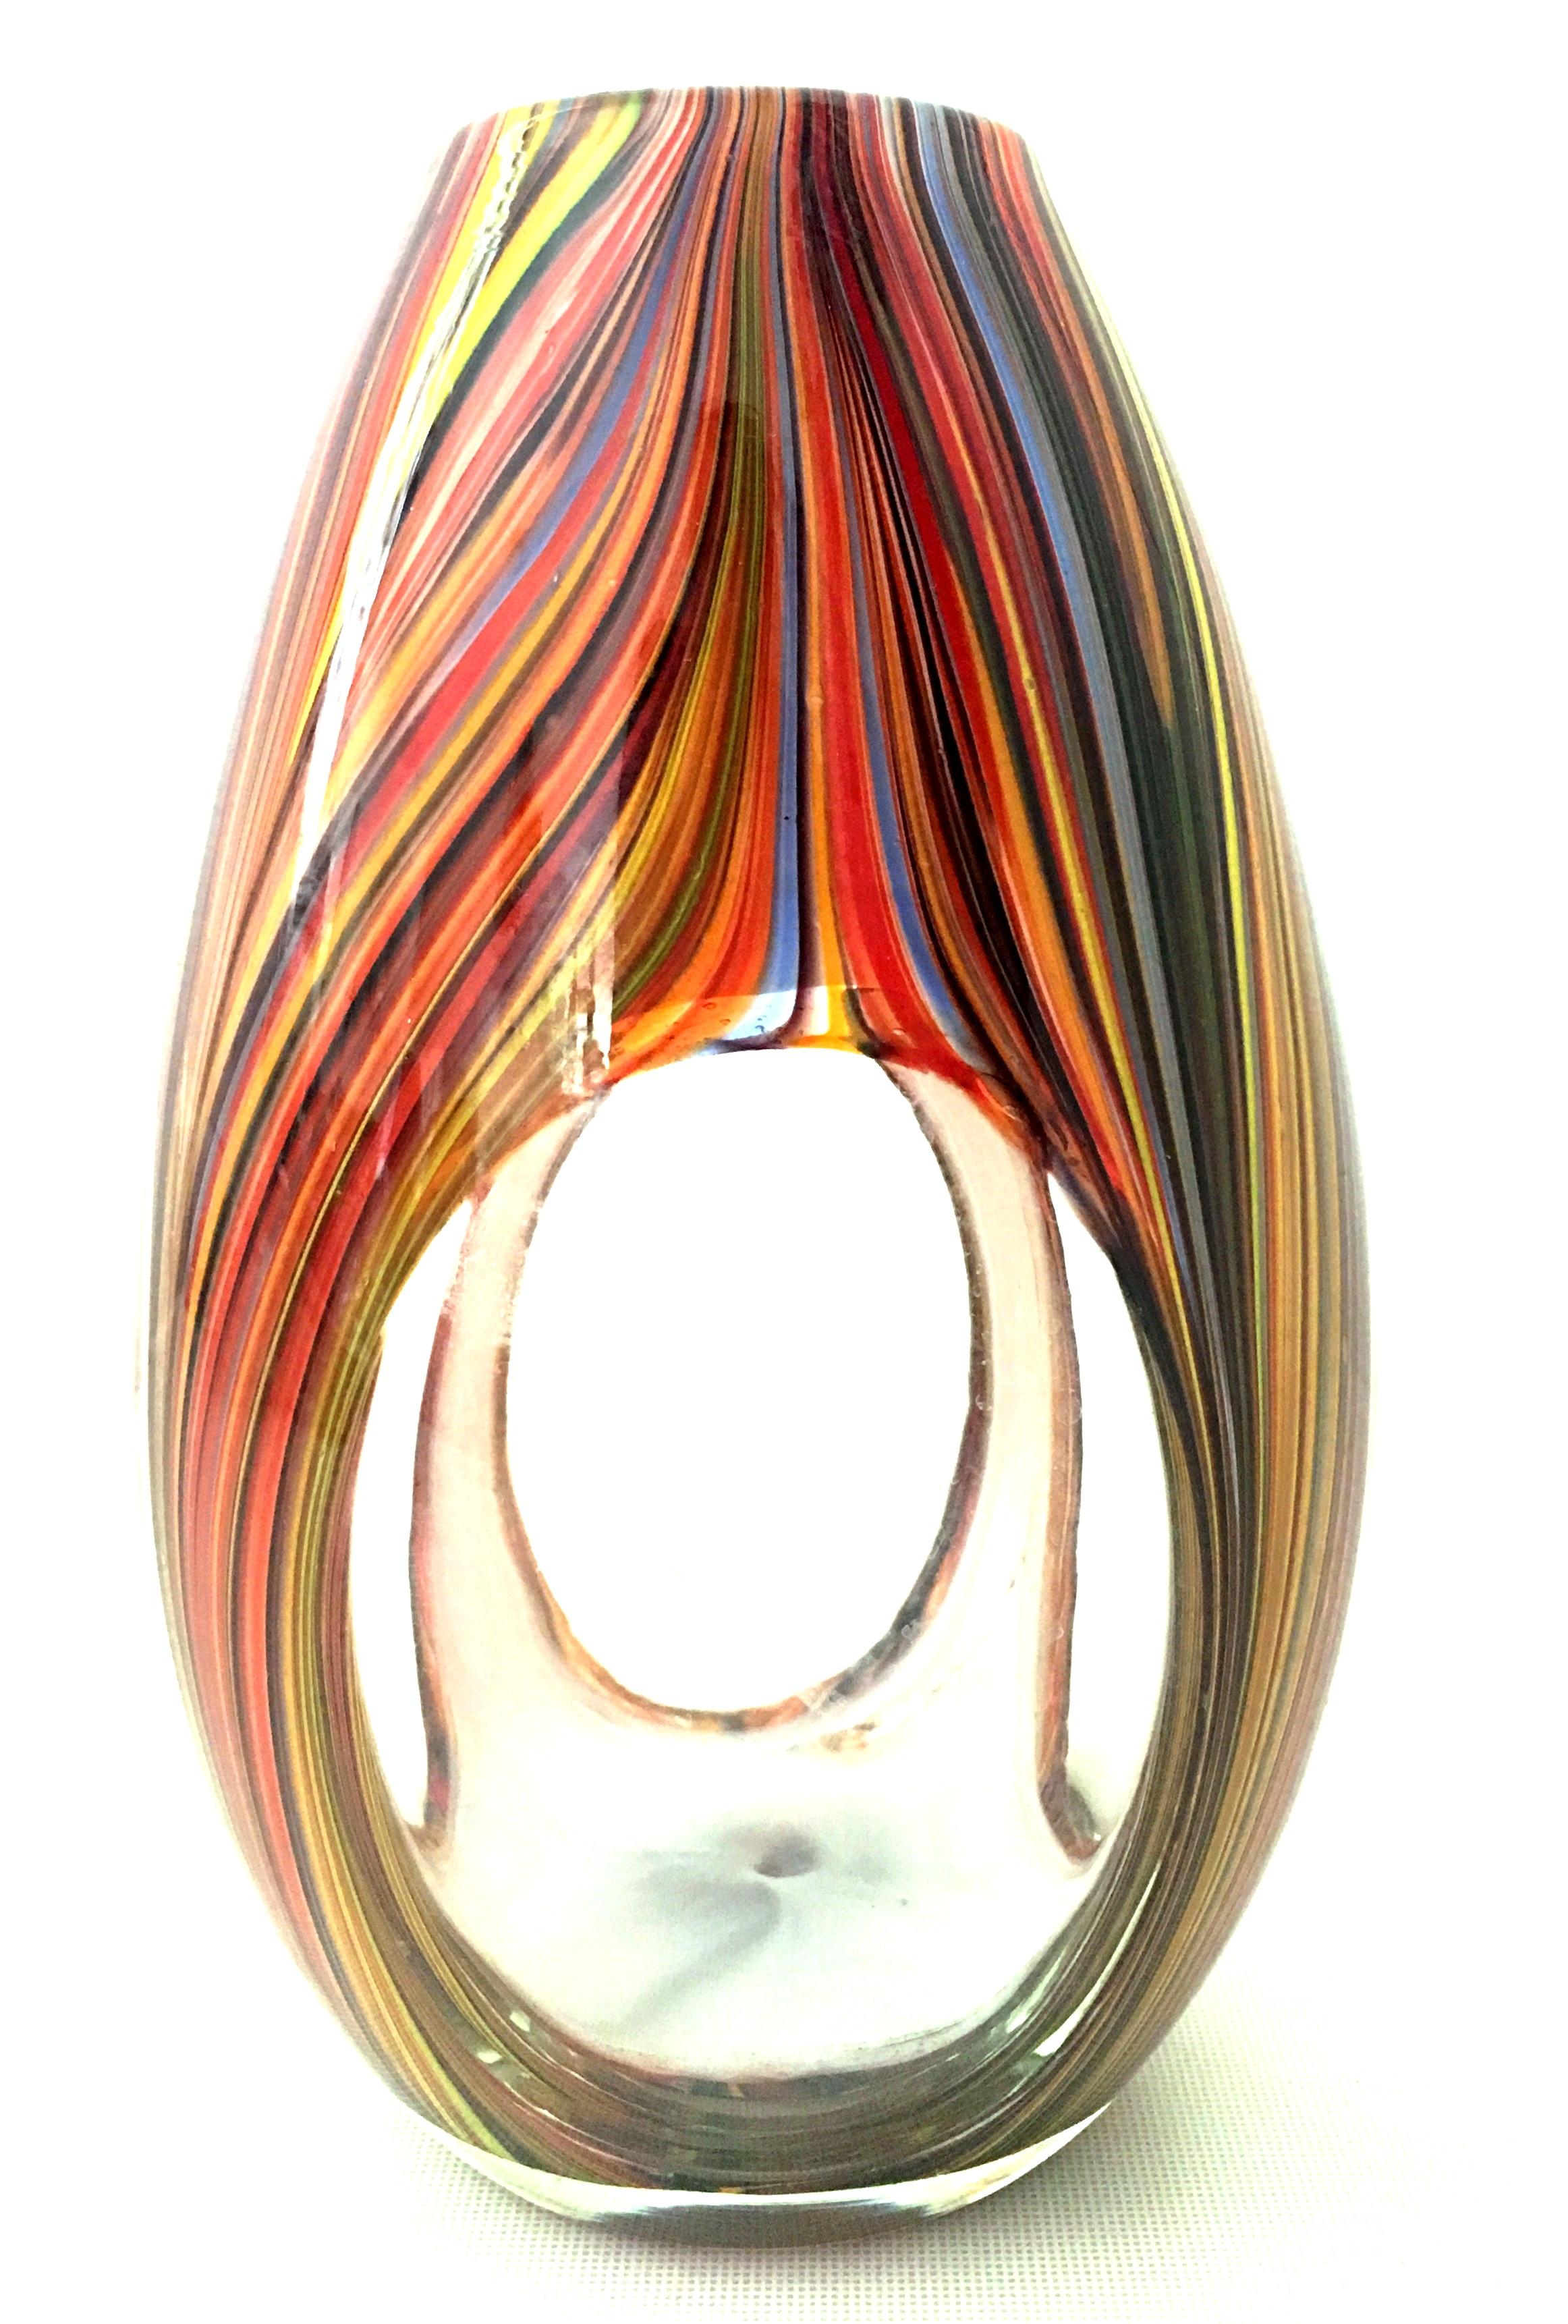 21st century and new Missoni modern optical striped blown glass vase. This new and never used ultra modern optical striped design blown glass vase by Missoni features a color palette with shades of orange, yellow, periwinkle, red and brown. This